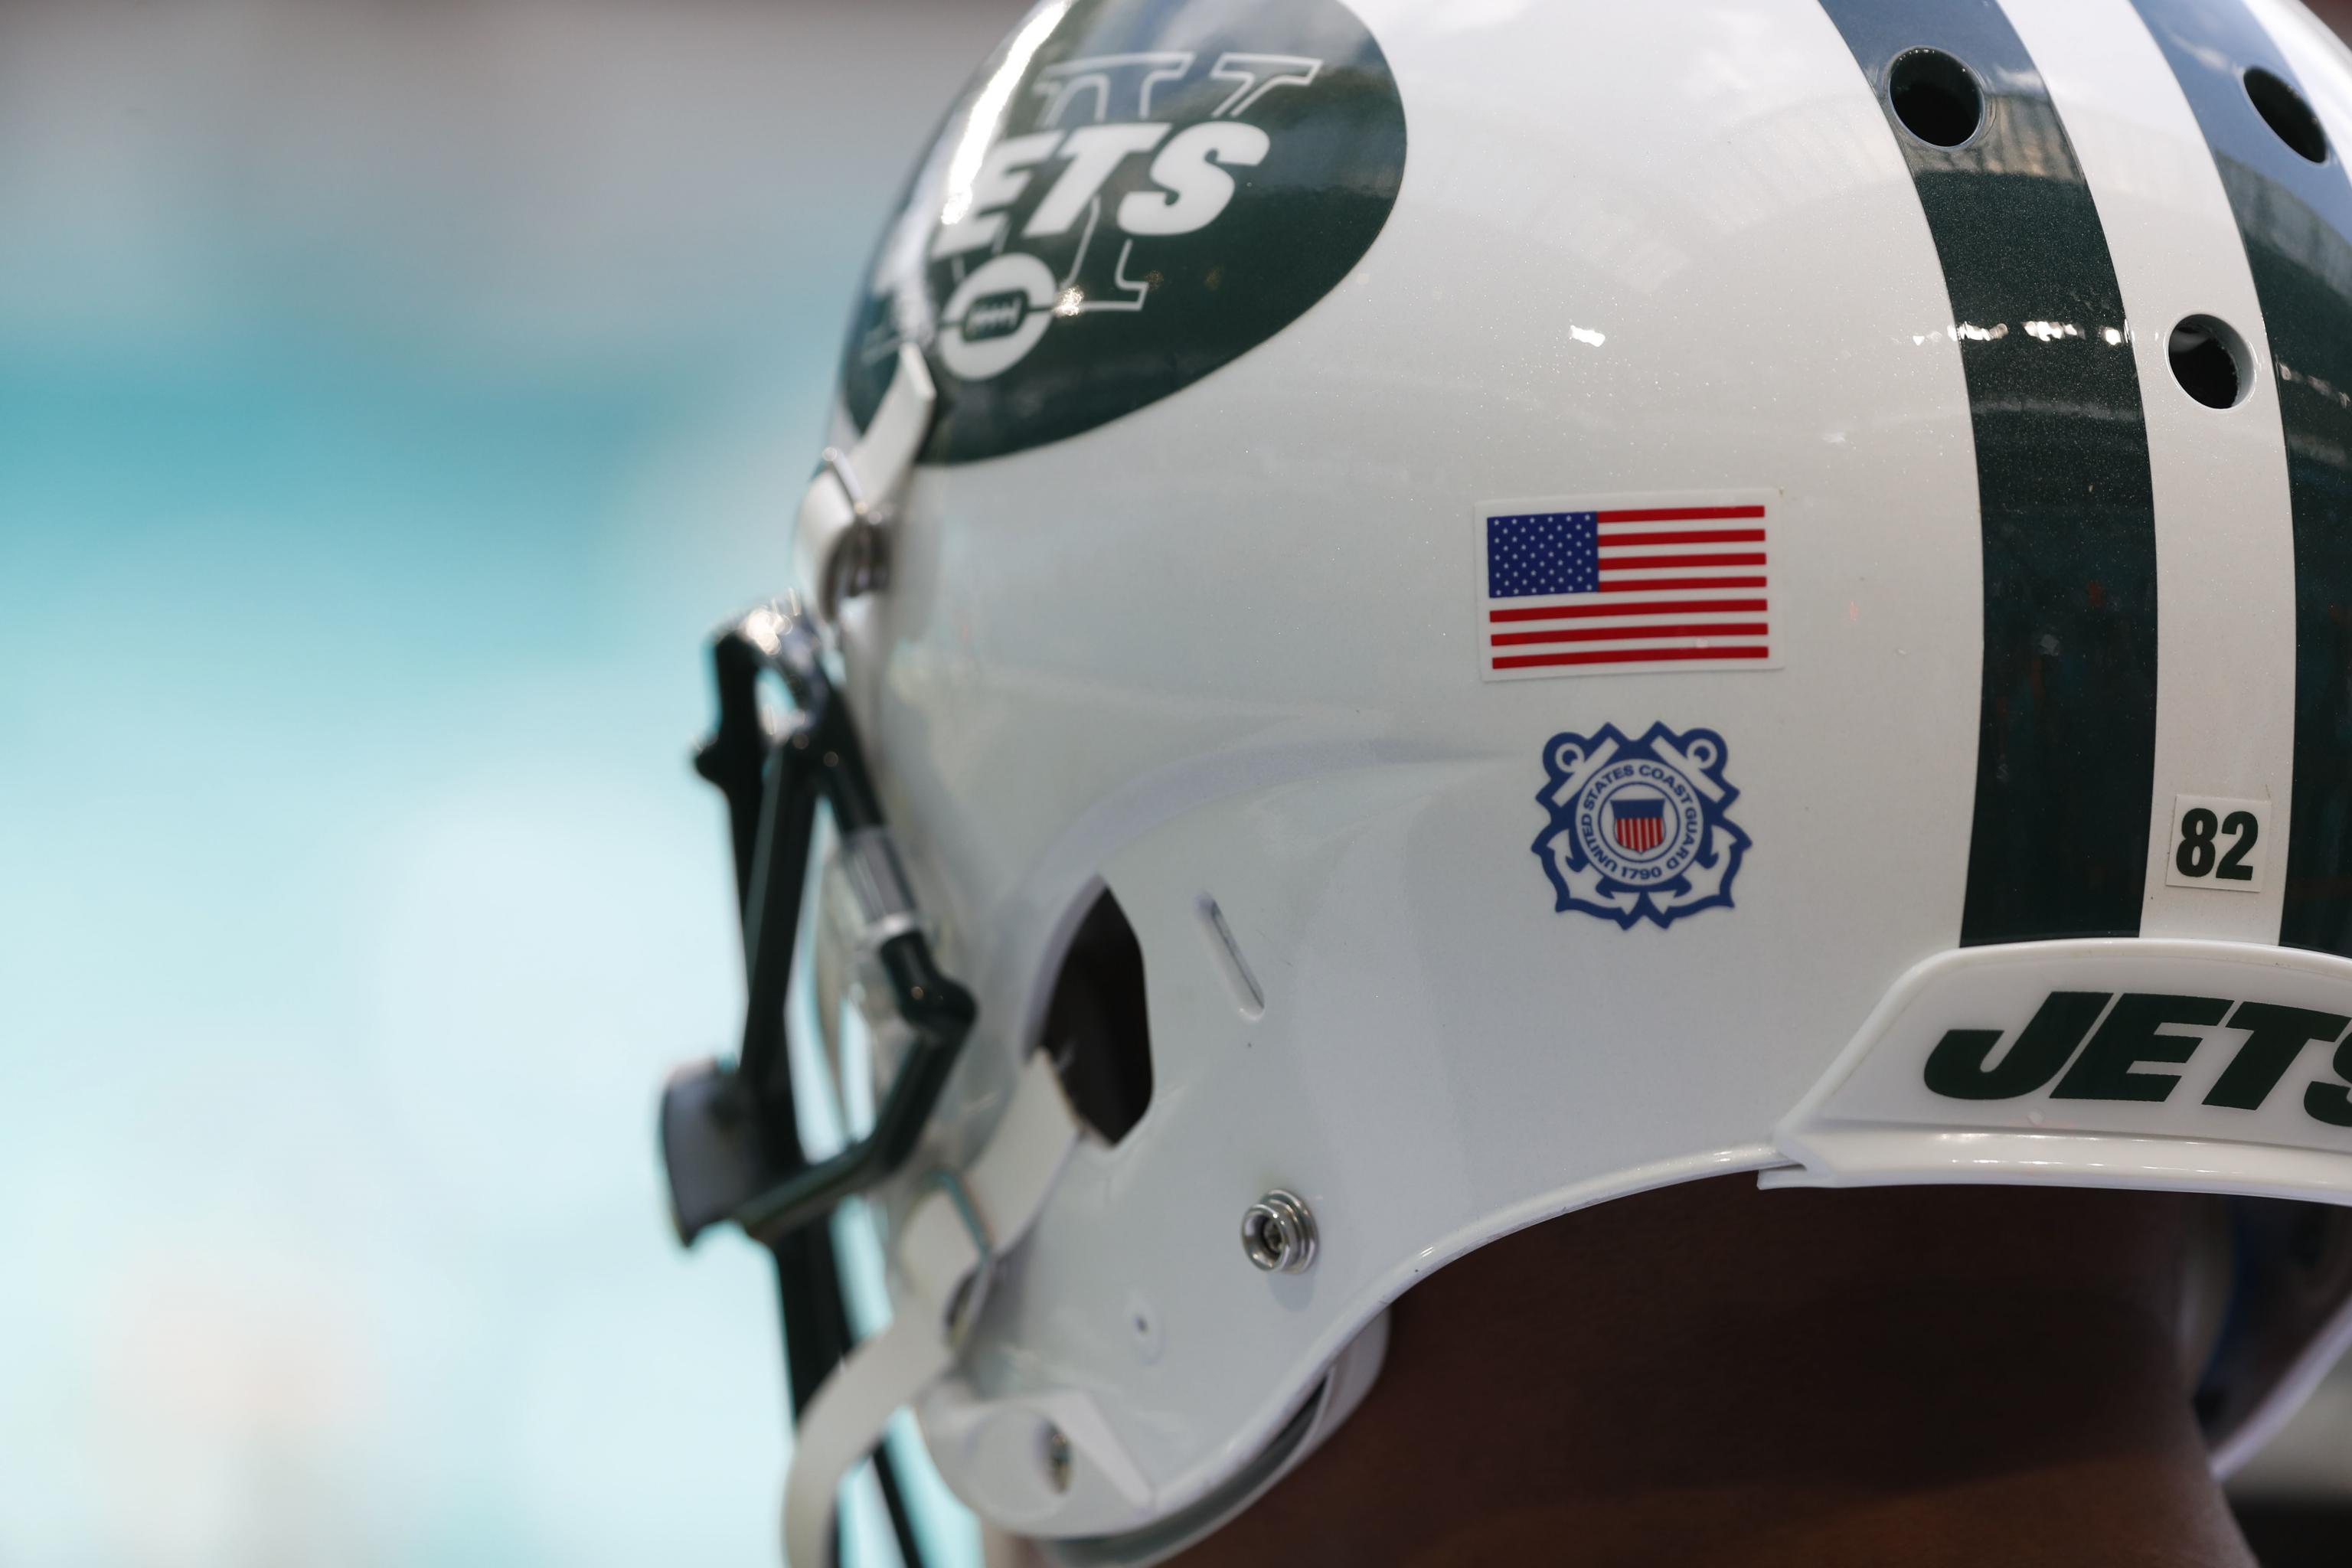 Jets unveil 'stealth black' helmets to pair with black jerseys for